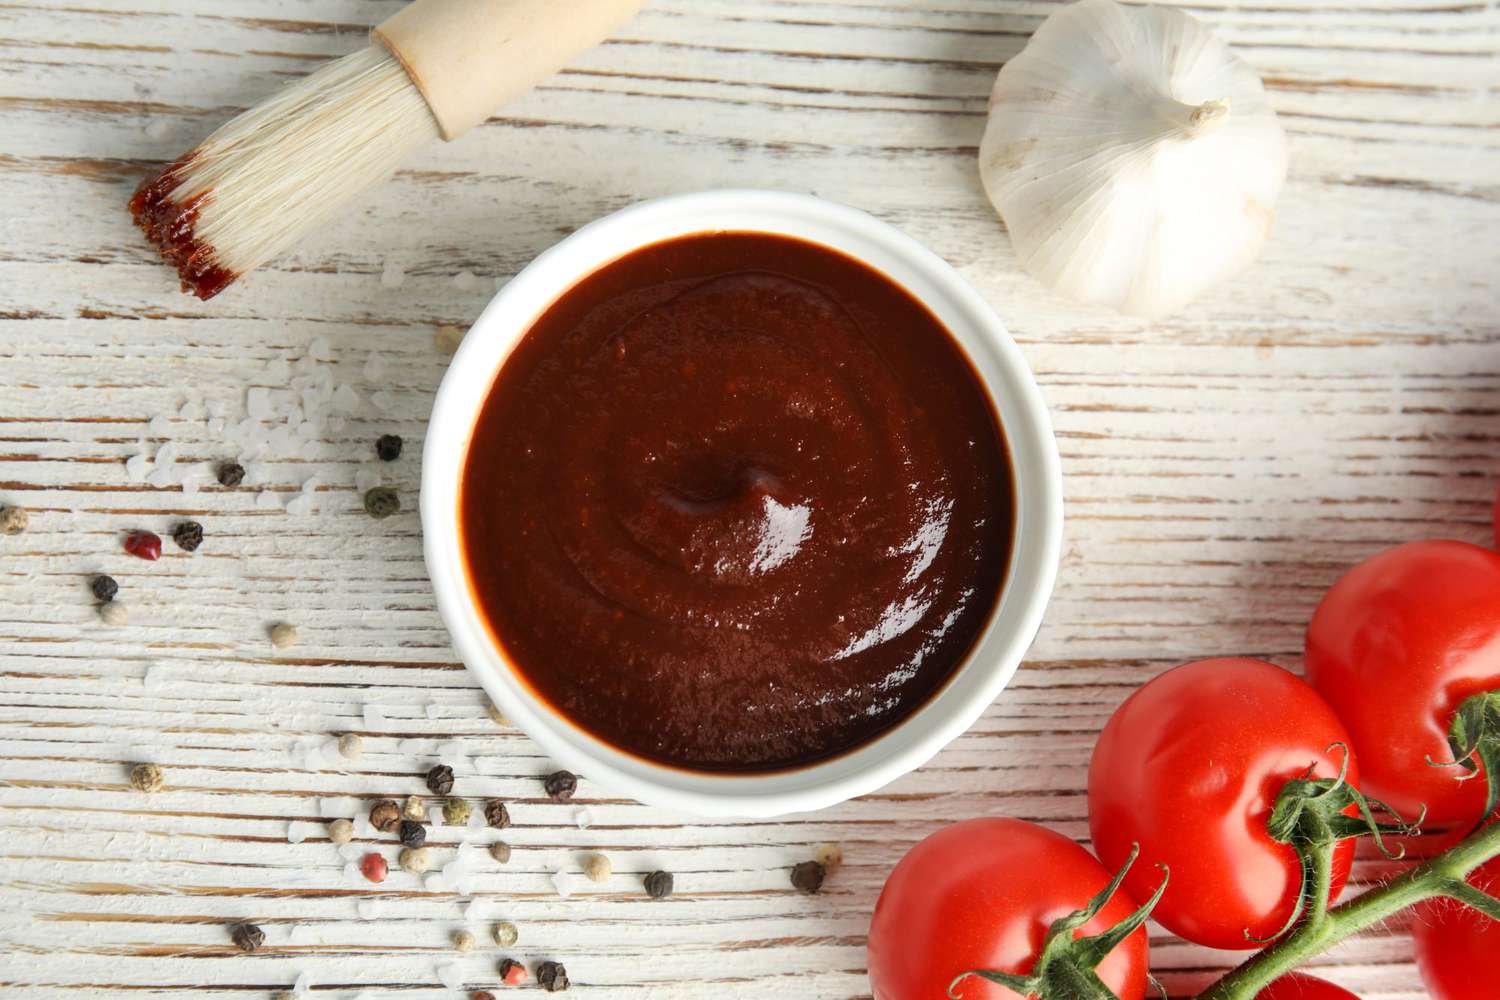 How to Make Barbecue Sauce That Goes With Chicken, Beef, and More